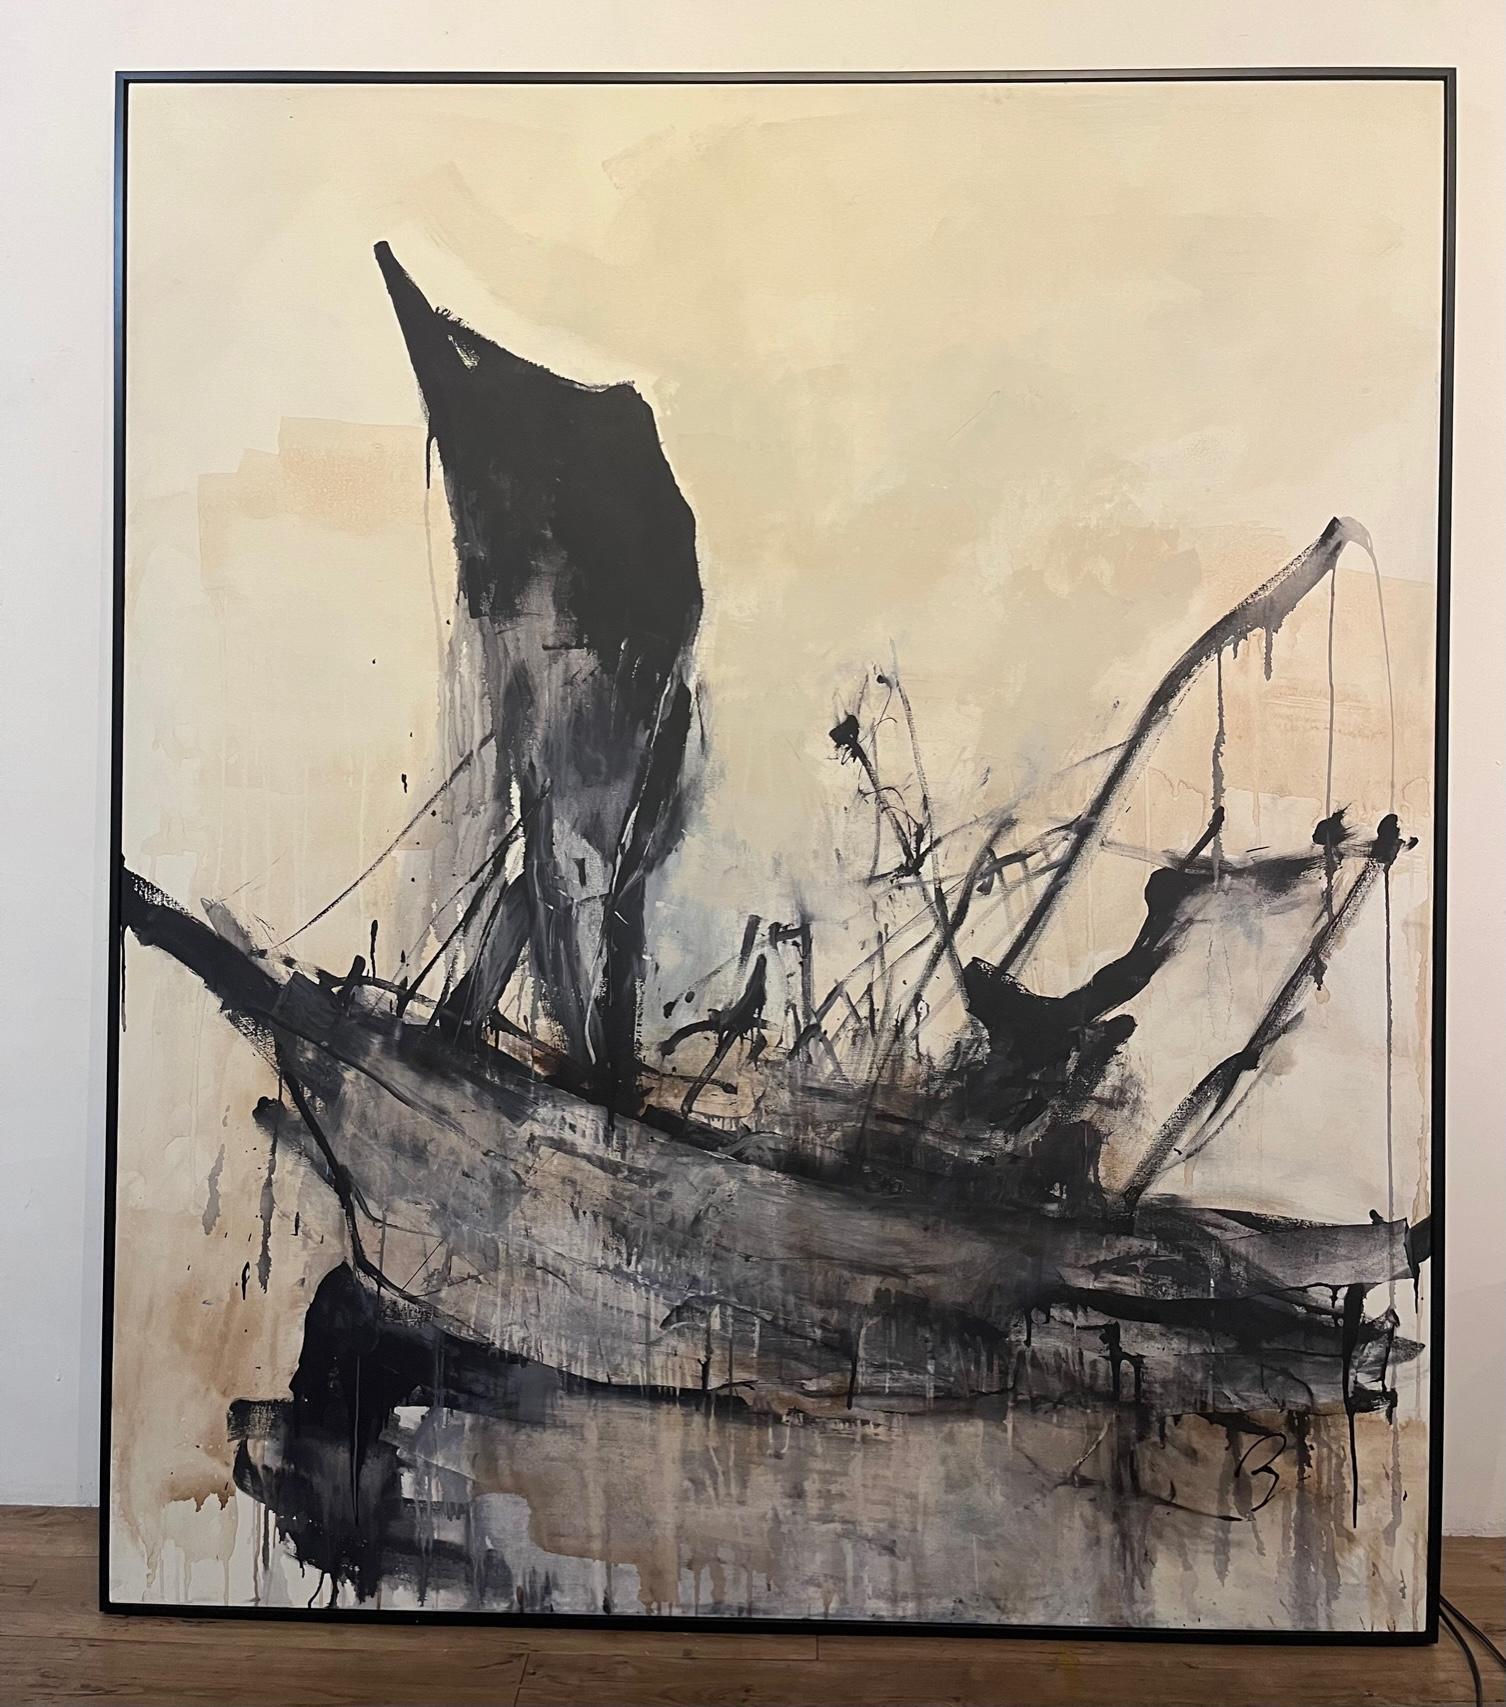 Shipwreck!!

Sheila Daube is an abstract expressionist painter, best known for artworks in dark, rich tones steeped in mythology, pop culture and wit. Her sensuous surfaces and jewel tone colors invite the viewer in to experience the delight of the